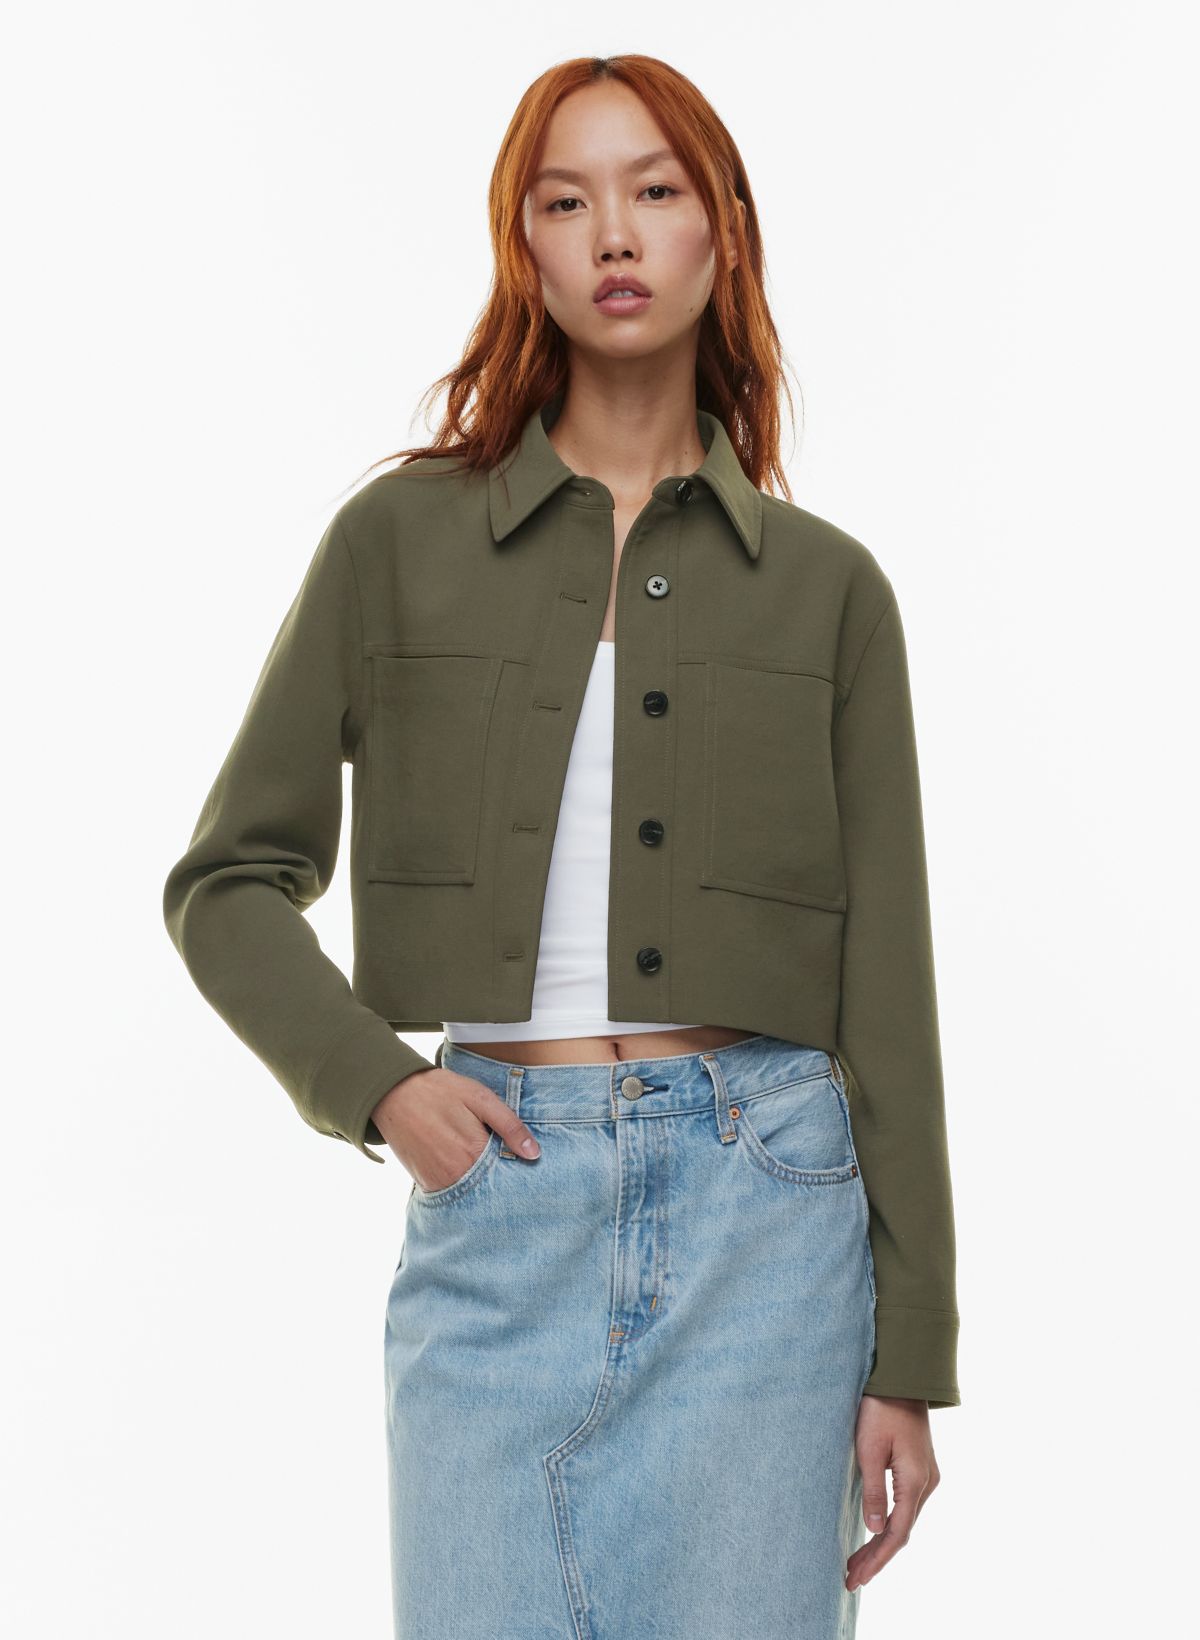 Our Guide To Cropped Jackets: Finding The Perfect Style - The Mom Edit